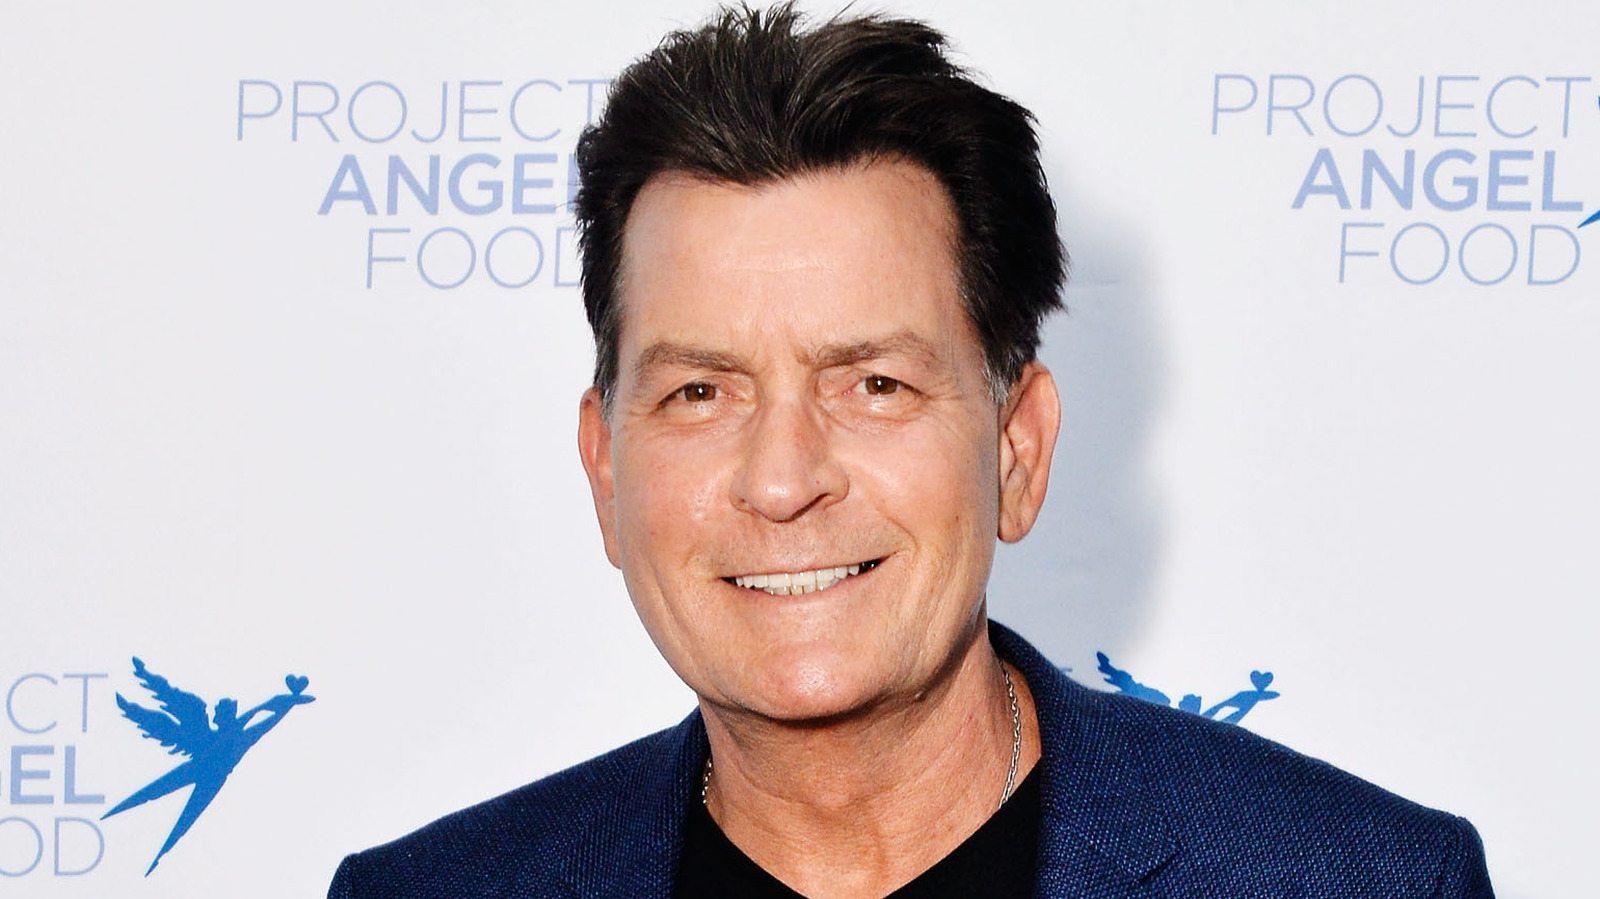 The Real Reason Charlie Sheen No Longer Drinks Alcohol